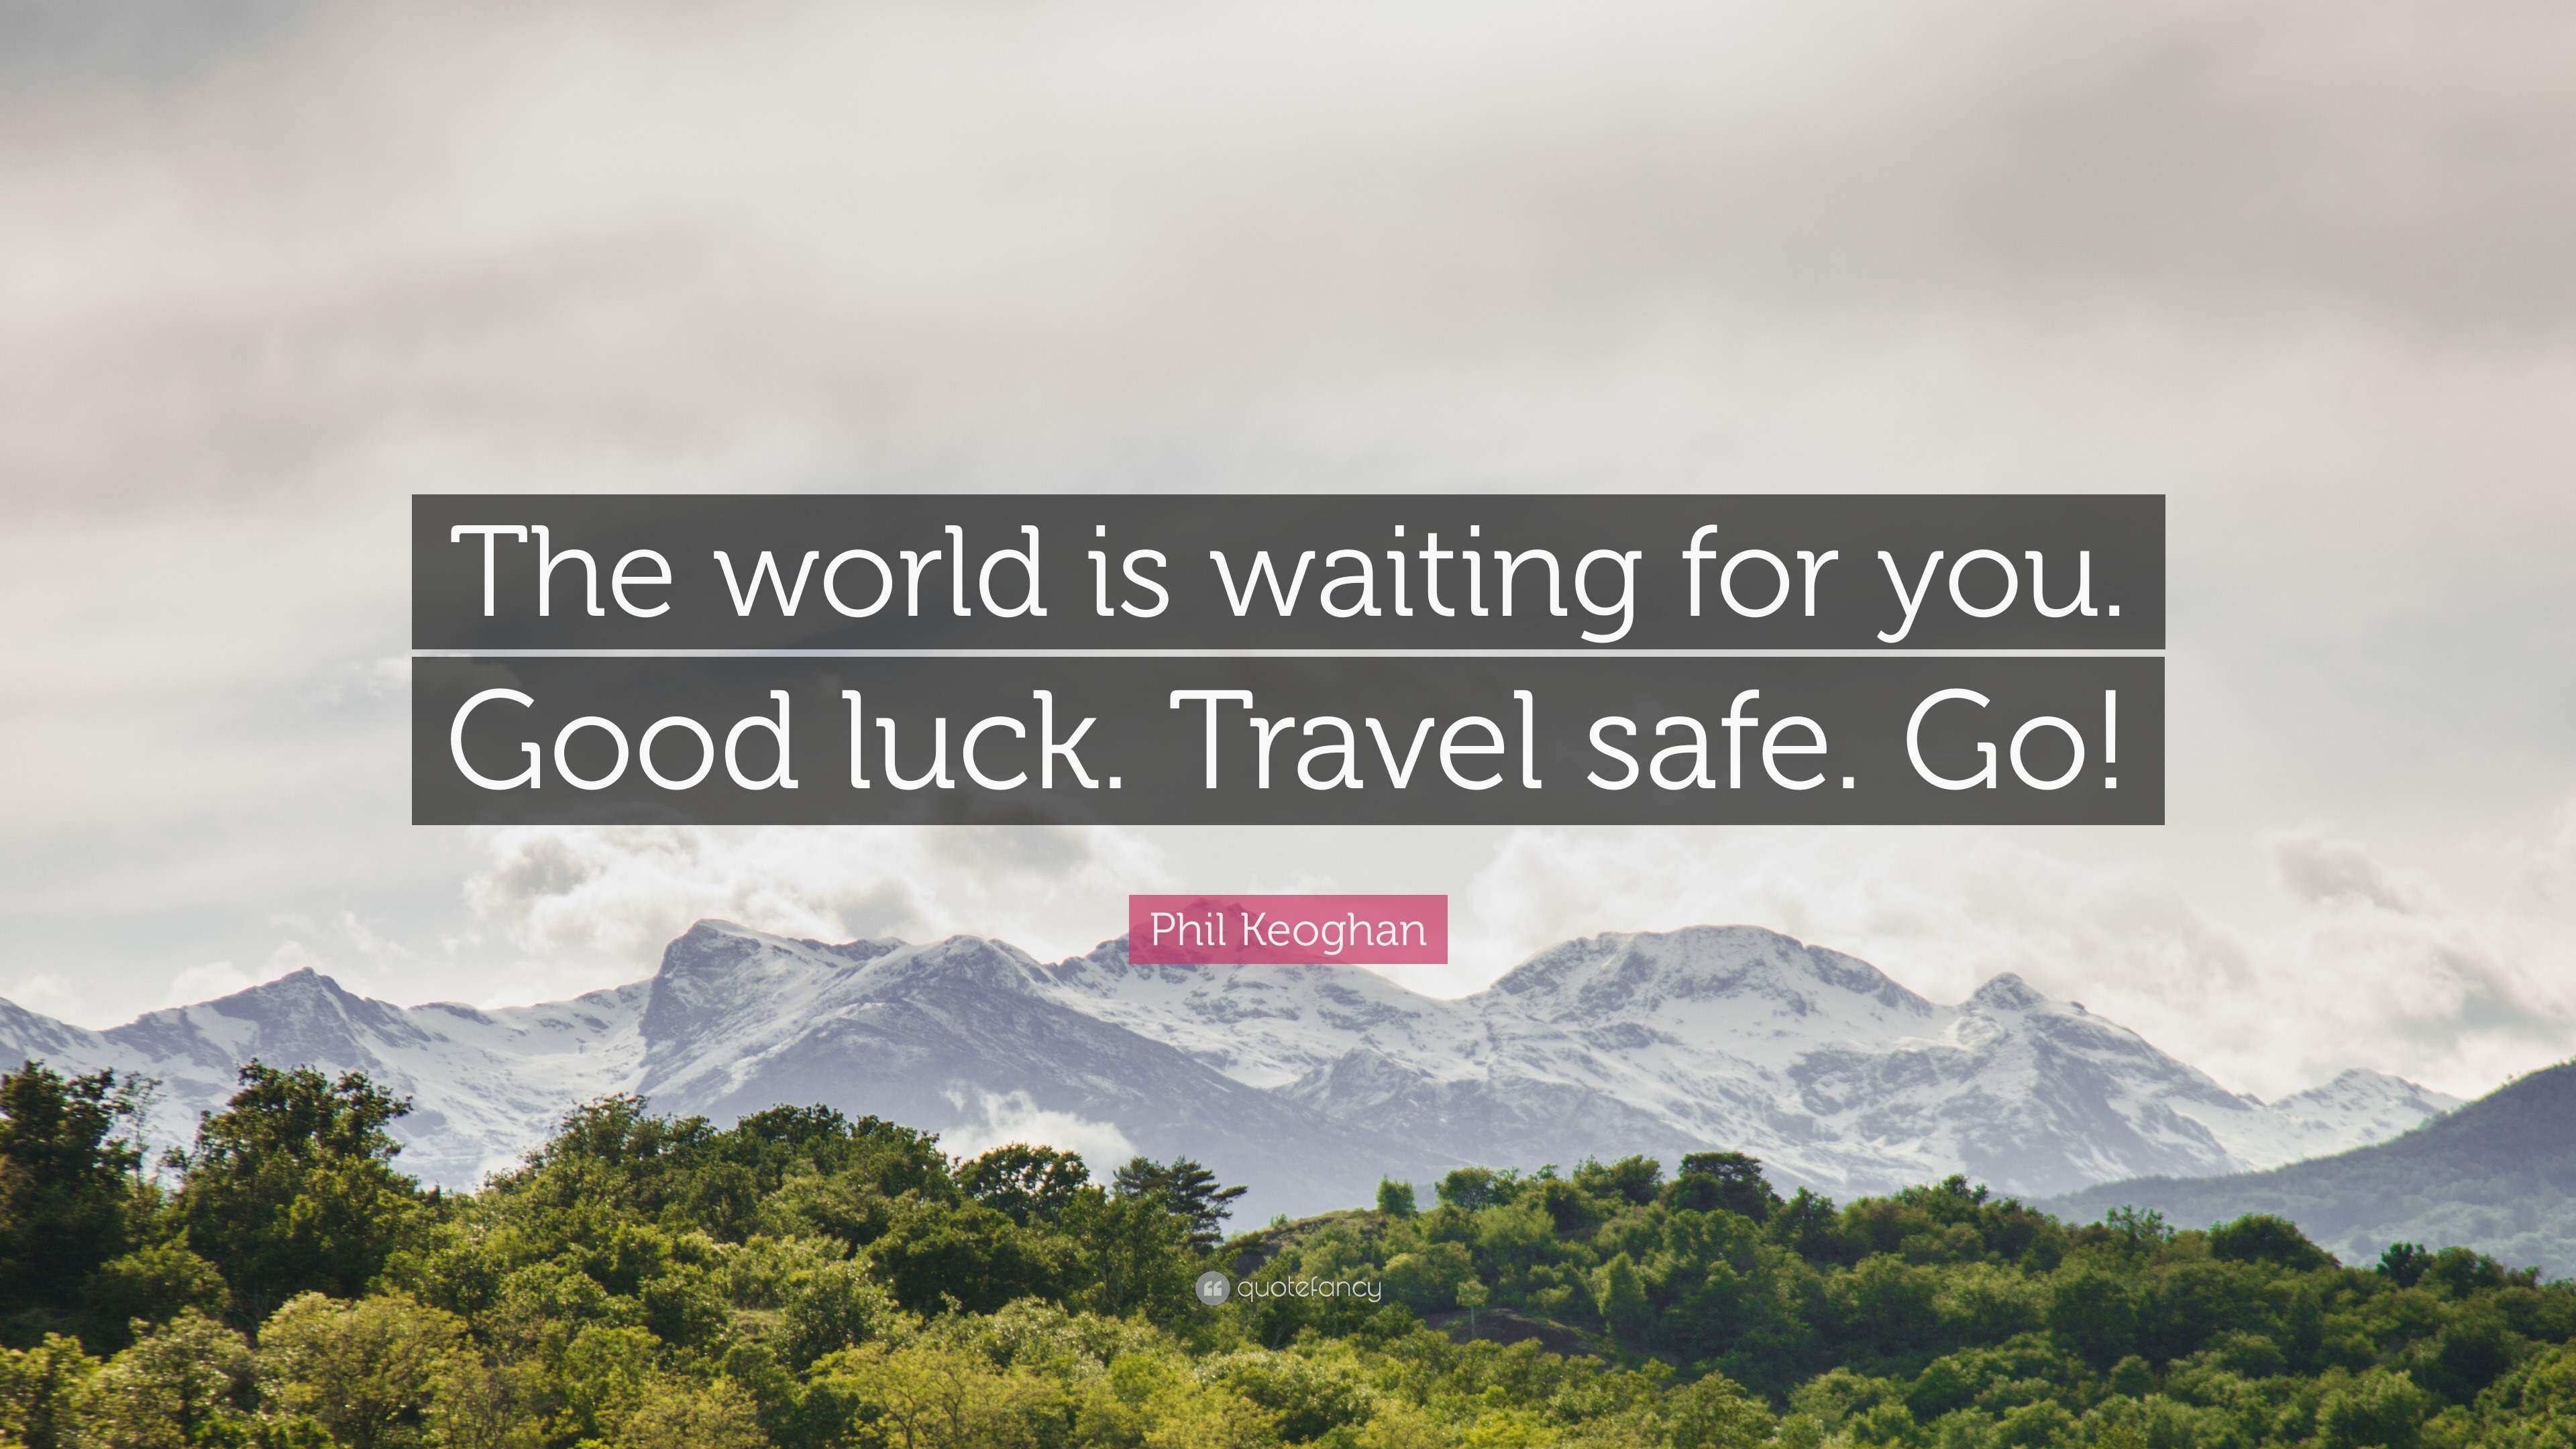 Phil Keoghan Quote: “The world is waiting for you. Good luck